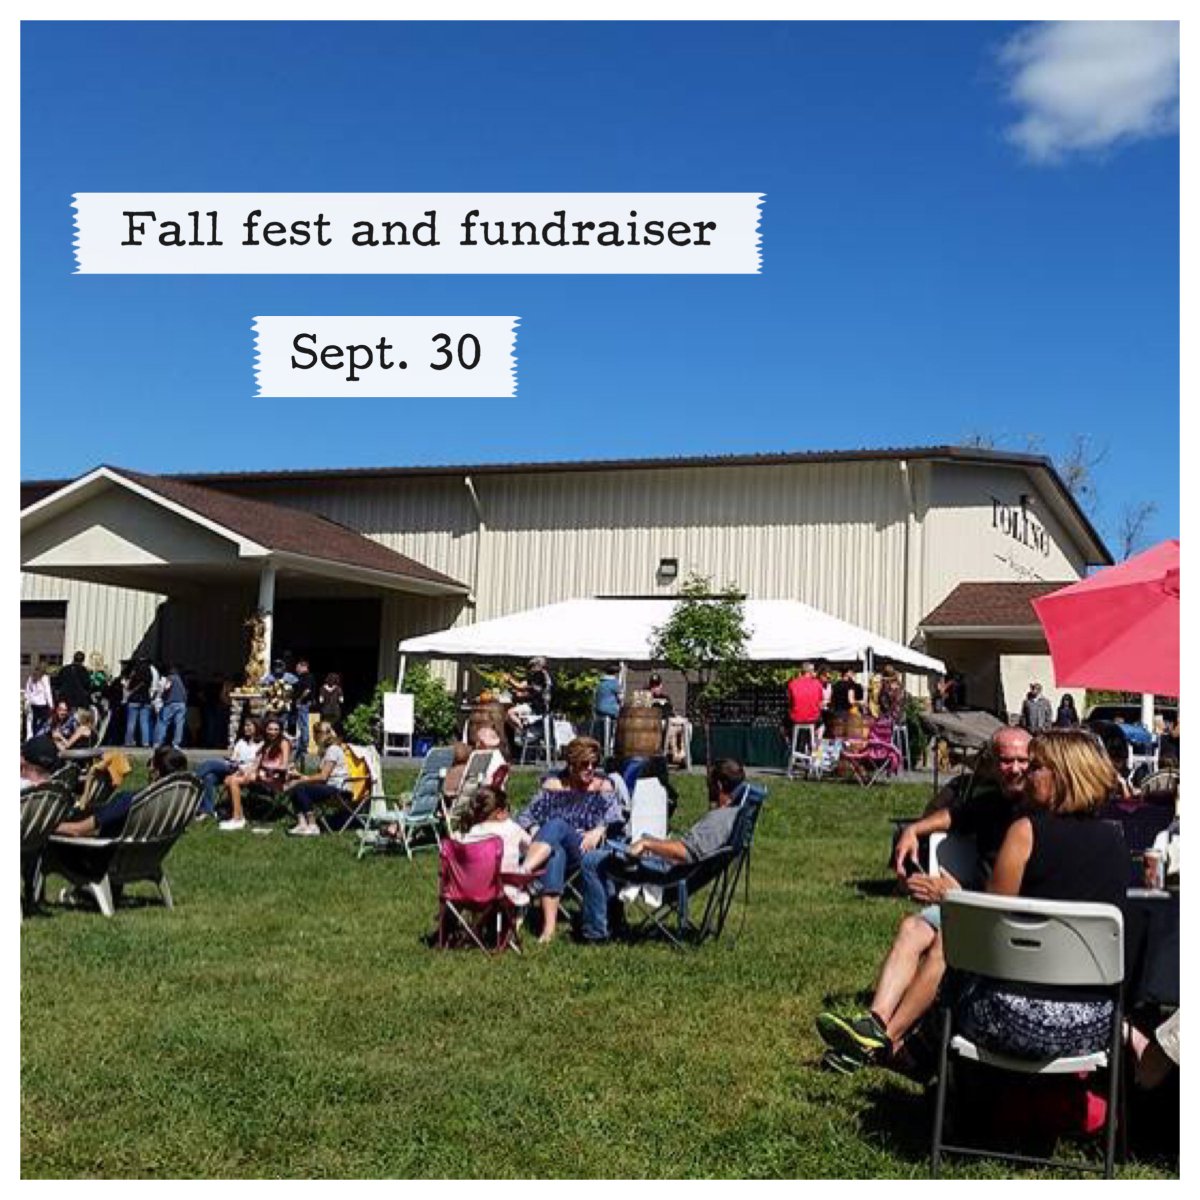 Still time to get tickets for Fall Fest & Fundraiser on Saturday! Live music, vendors, tours, grape stomp & more tolinovineyards.com/fall_fest.php